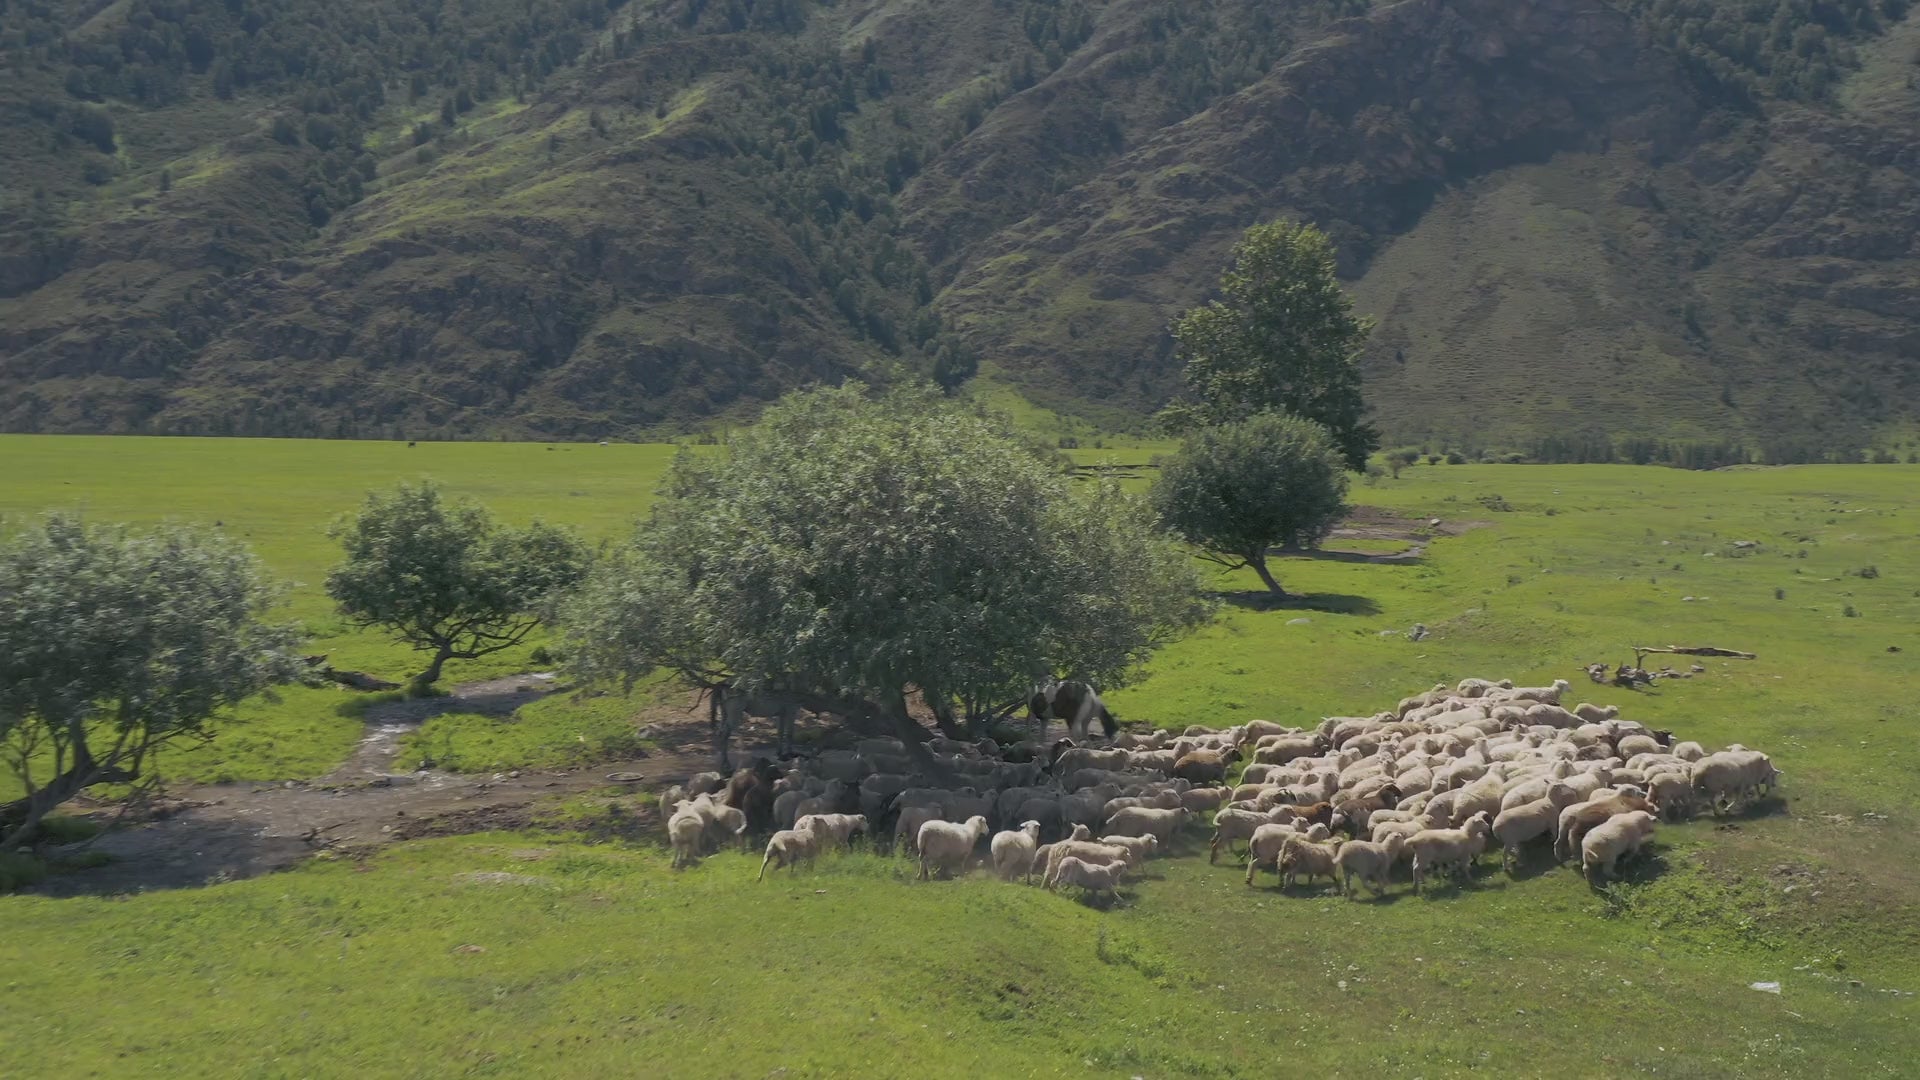 Video laden: Many sheep are running in the field